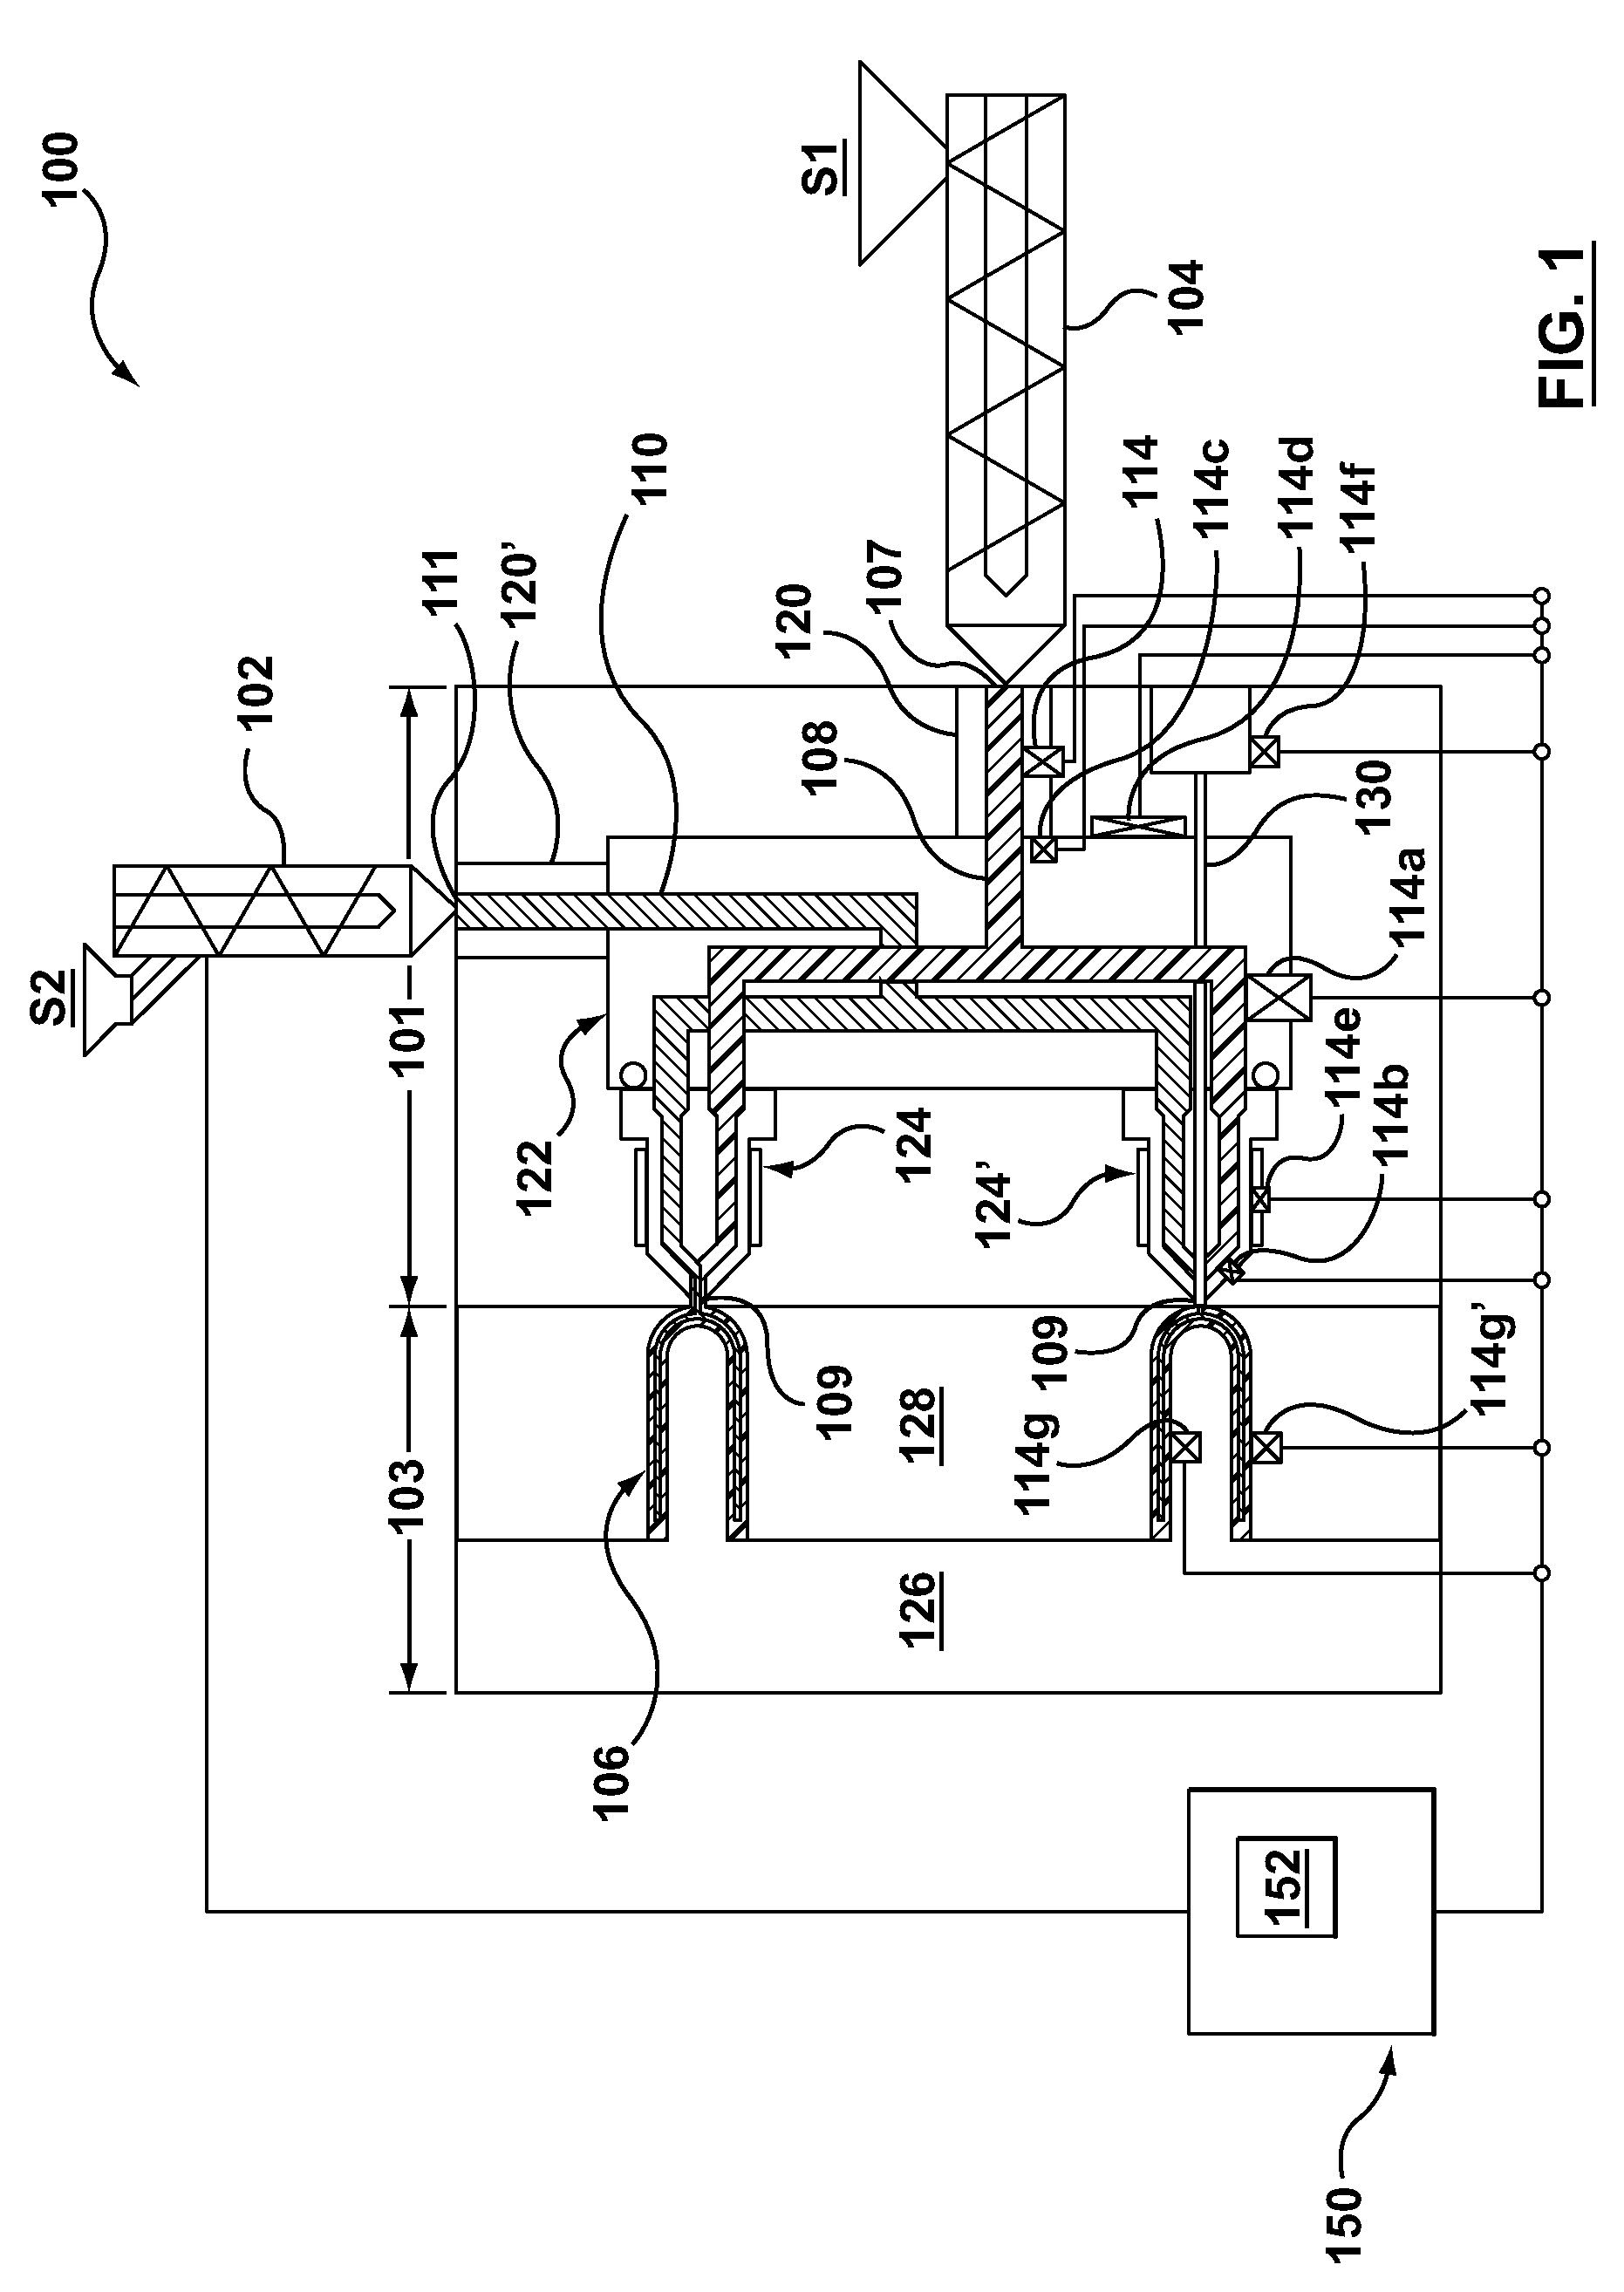 Closed loop control of auxiliary injection unit